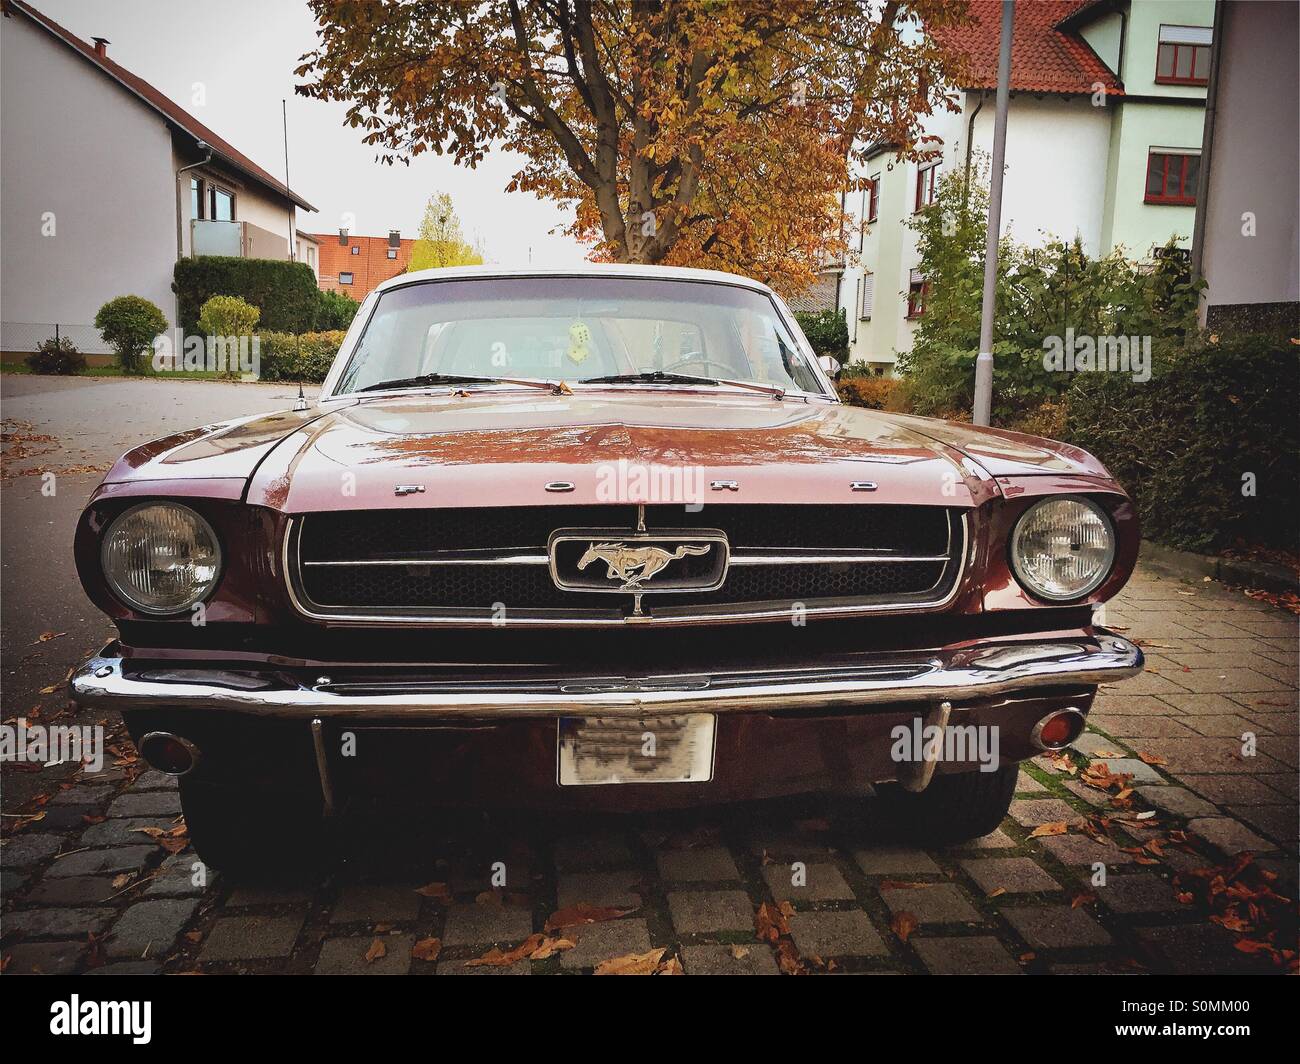 Alte Ford Mustang - EDITORIAL Stockfoto